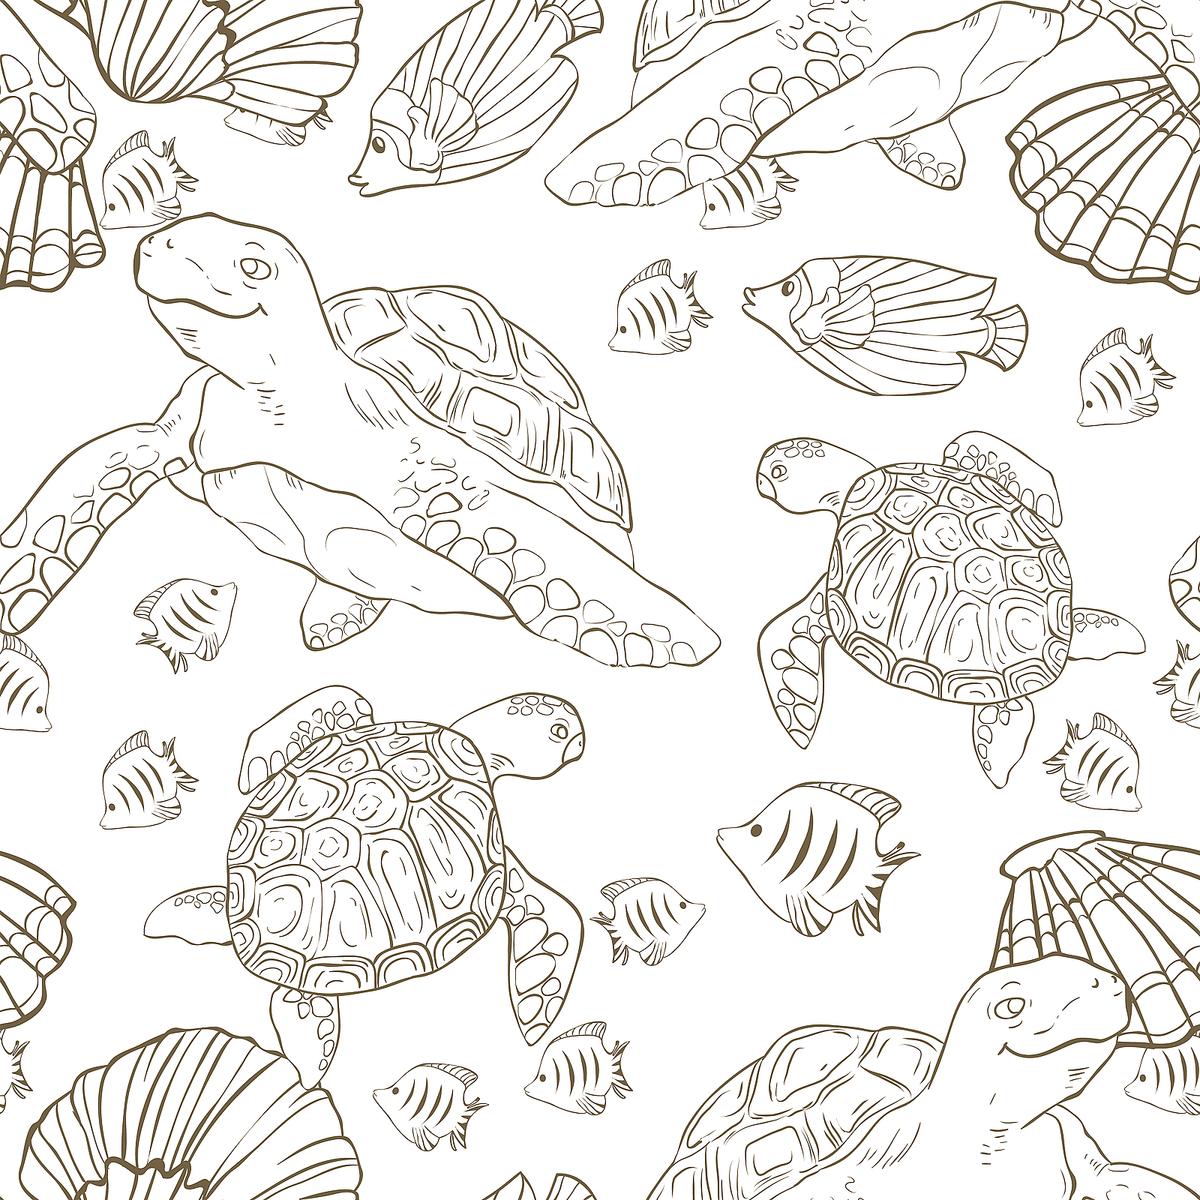 Sea Creatures Coloring Pages: Fish, Dolphins, Sharks & Other ...